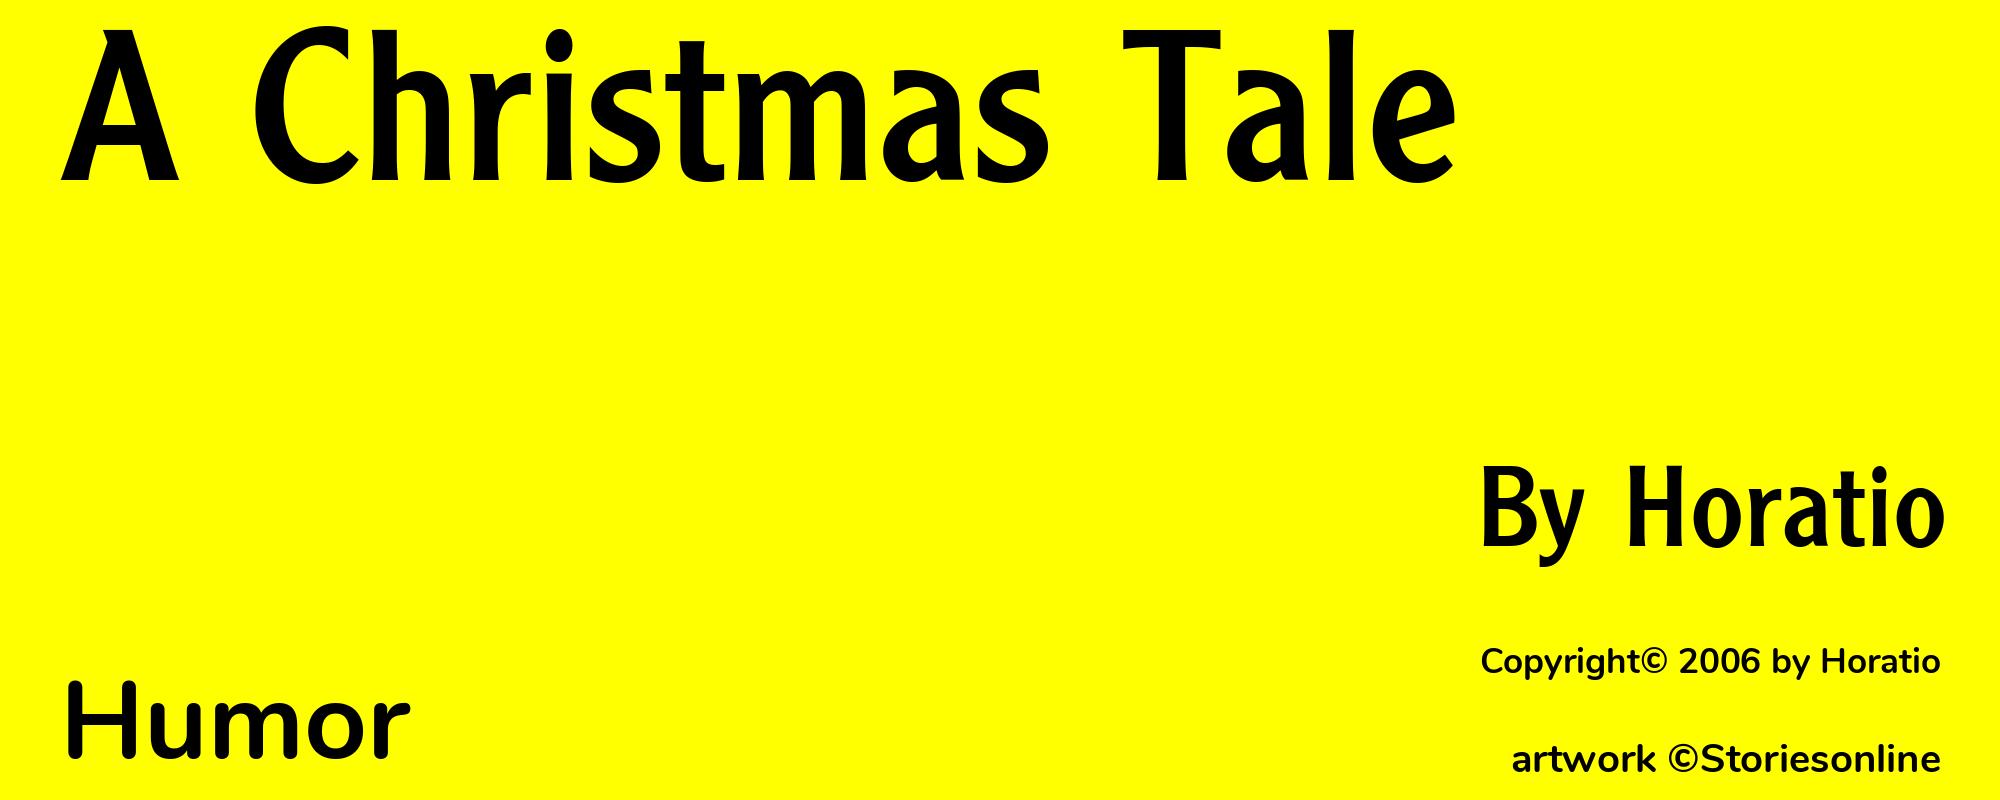 A Christmas Tale - Cover